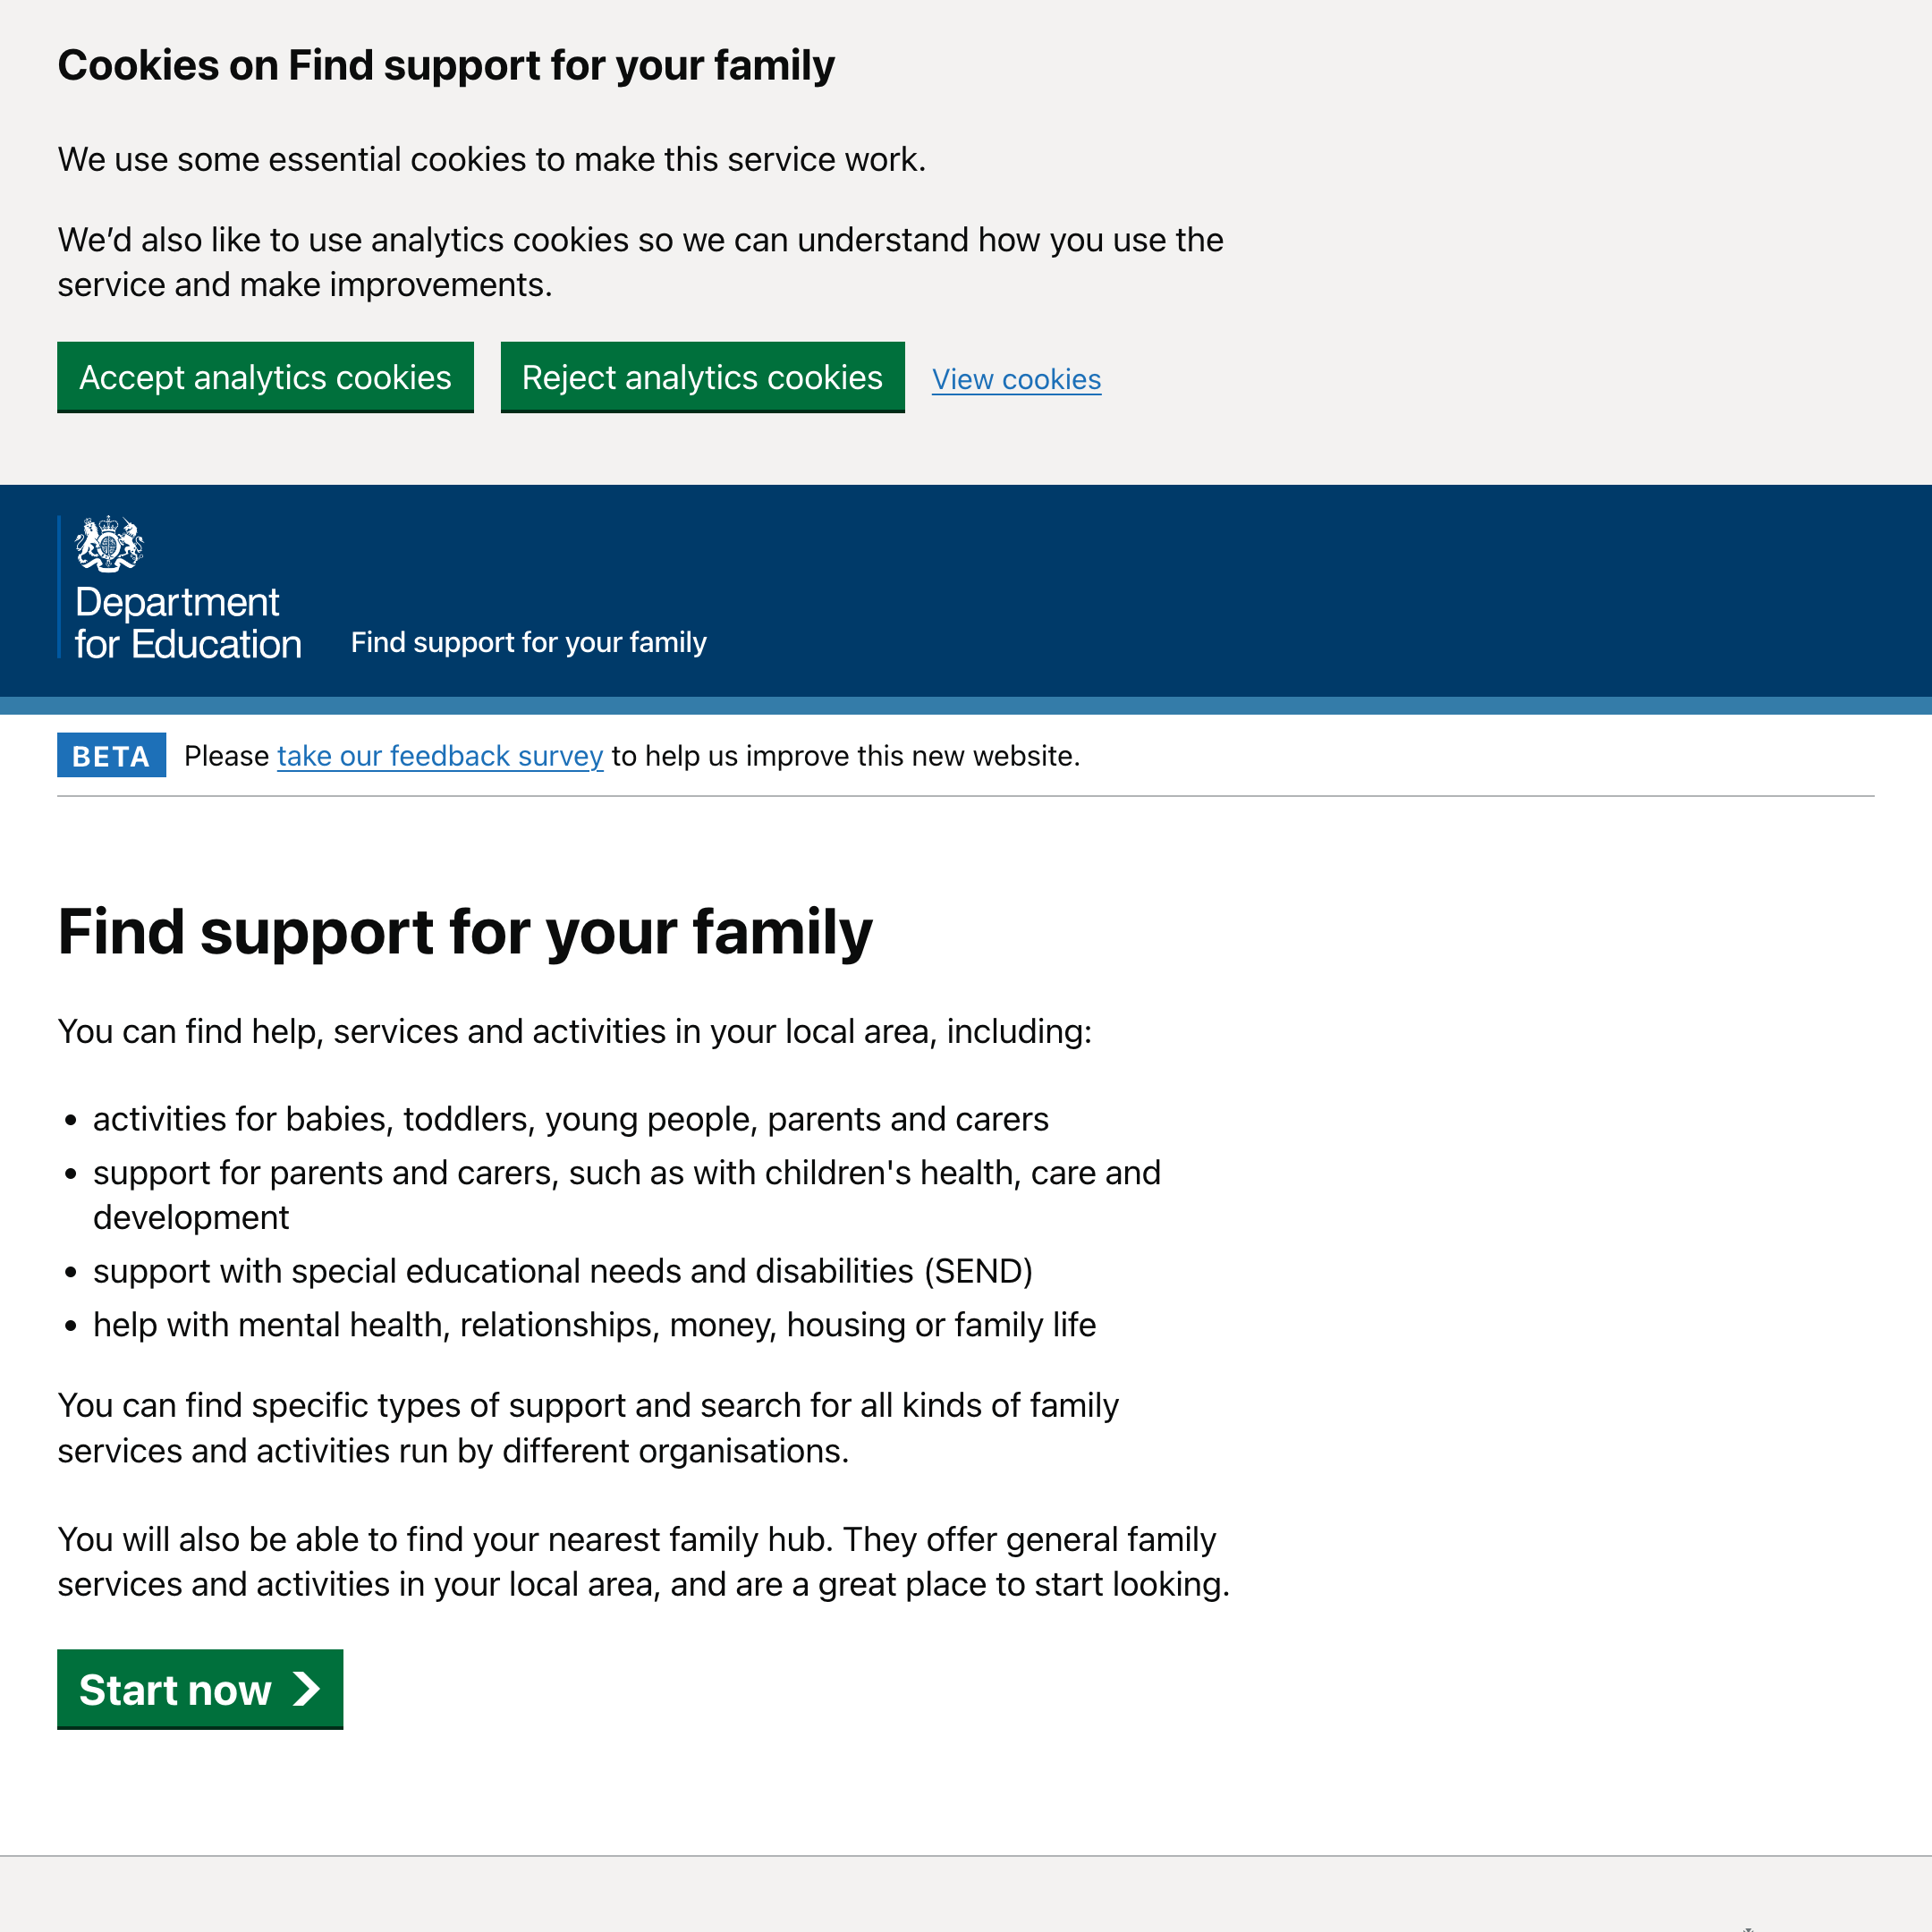 Find support for your family